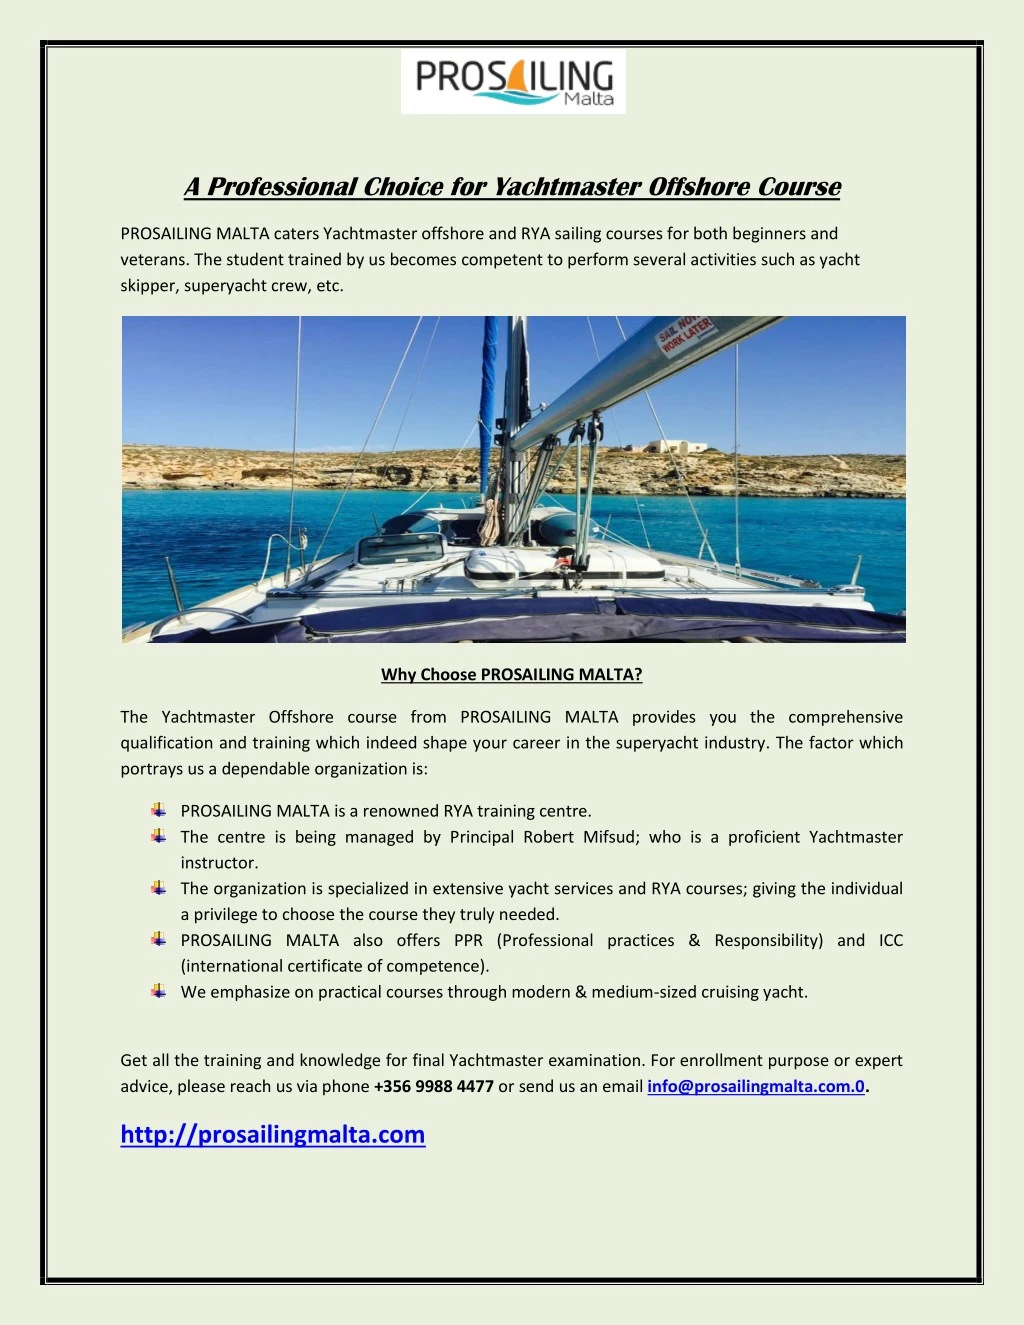 a professional choice for yachtmaster offshore